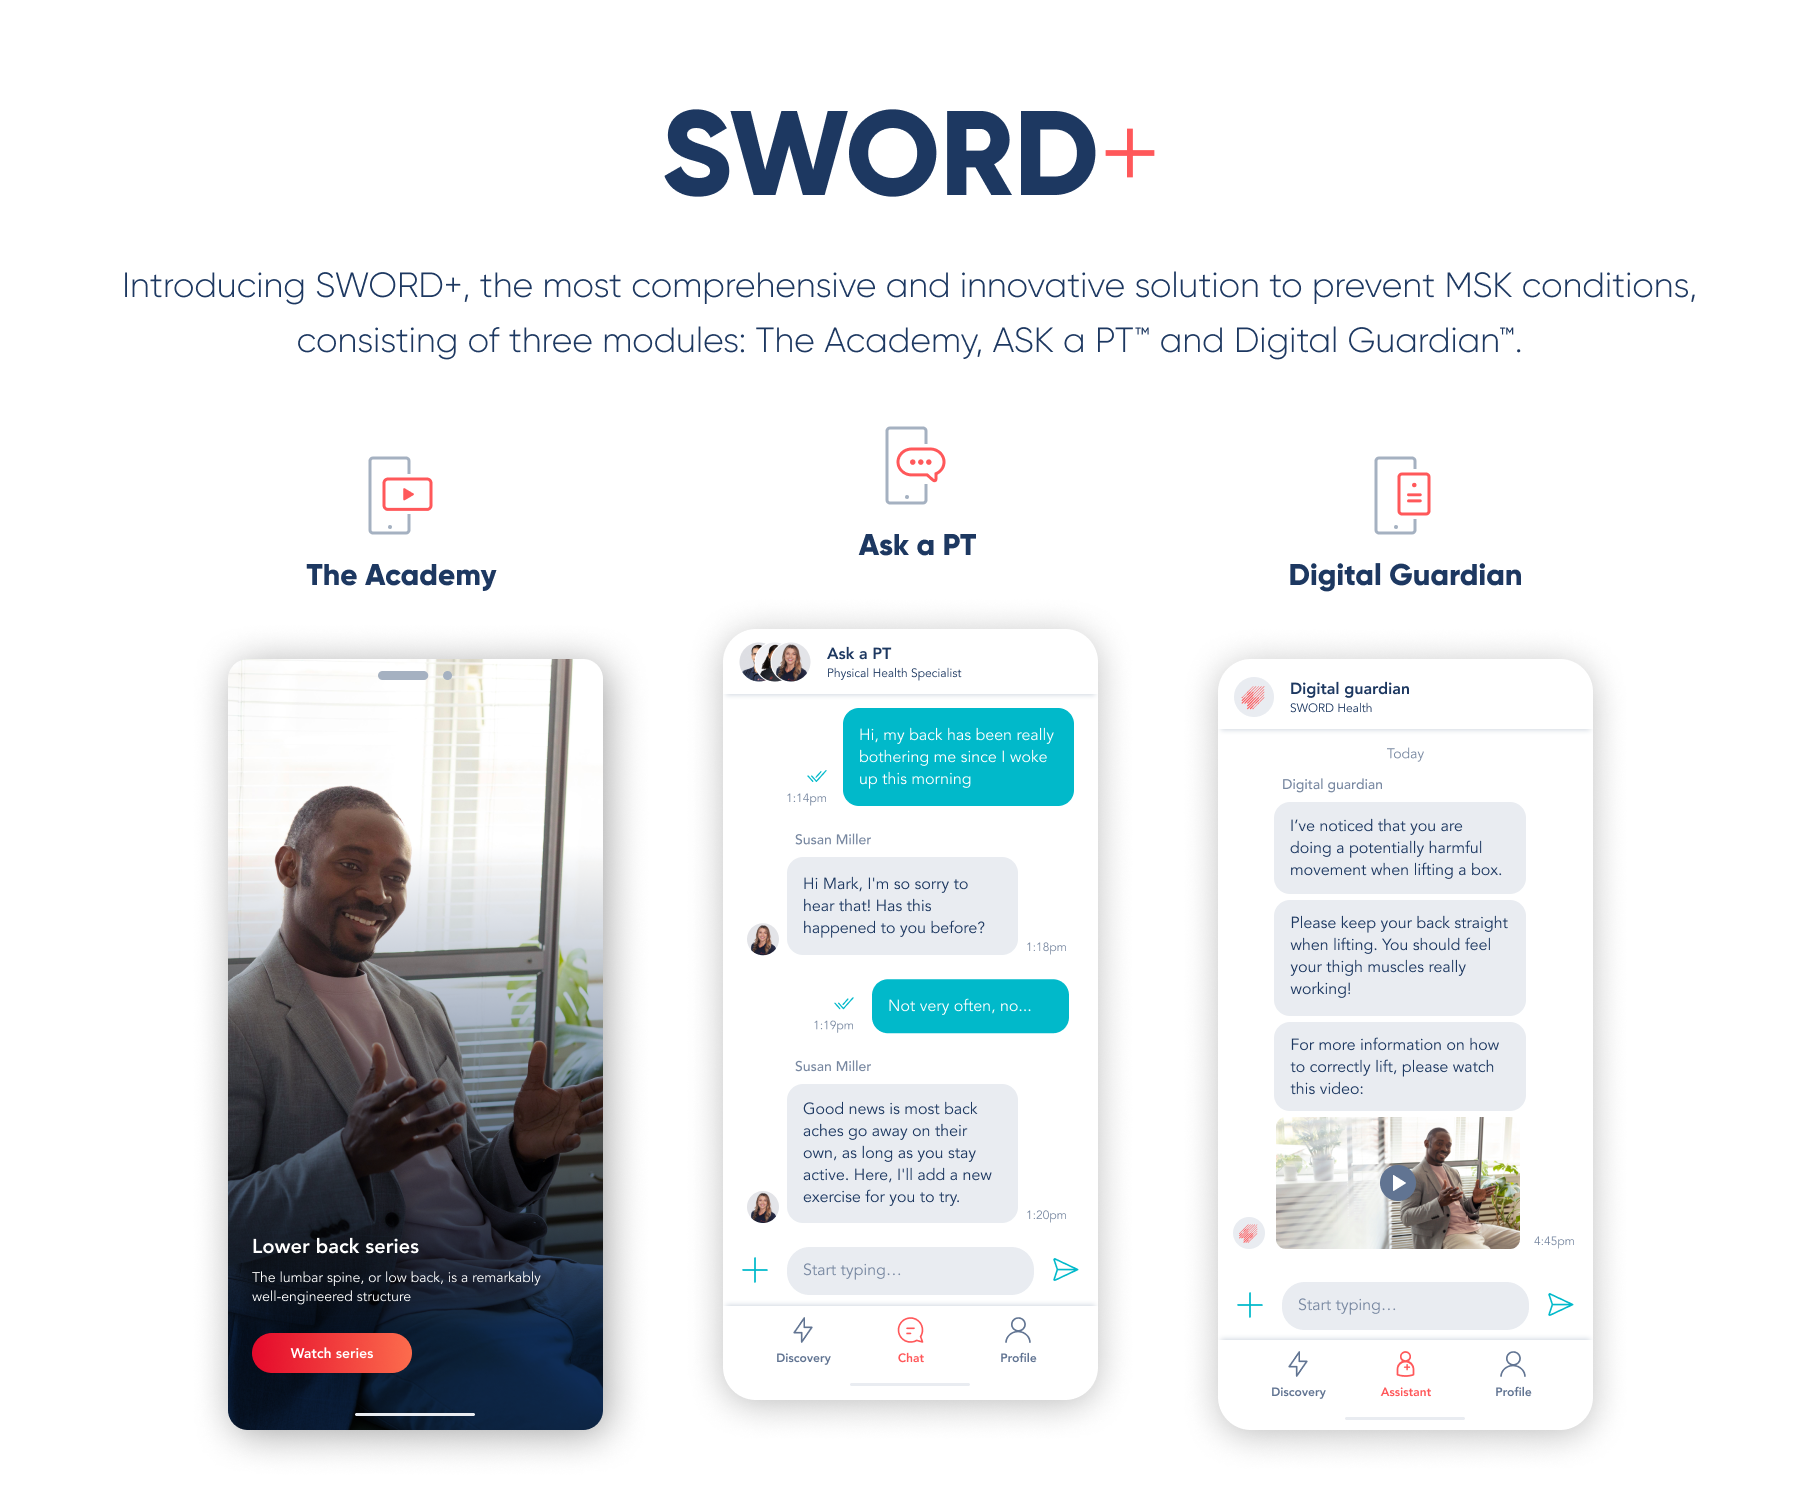 Introducing SWORD+, the most comprehensive and innovative solution to prevent MSK conditions, including The Academy, ASK a PT, and Digital Guardian